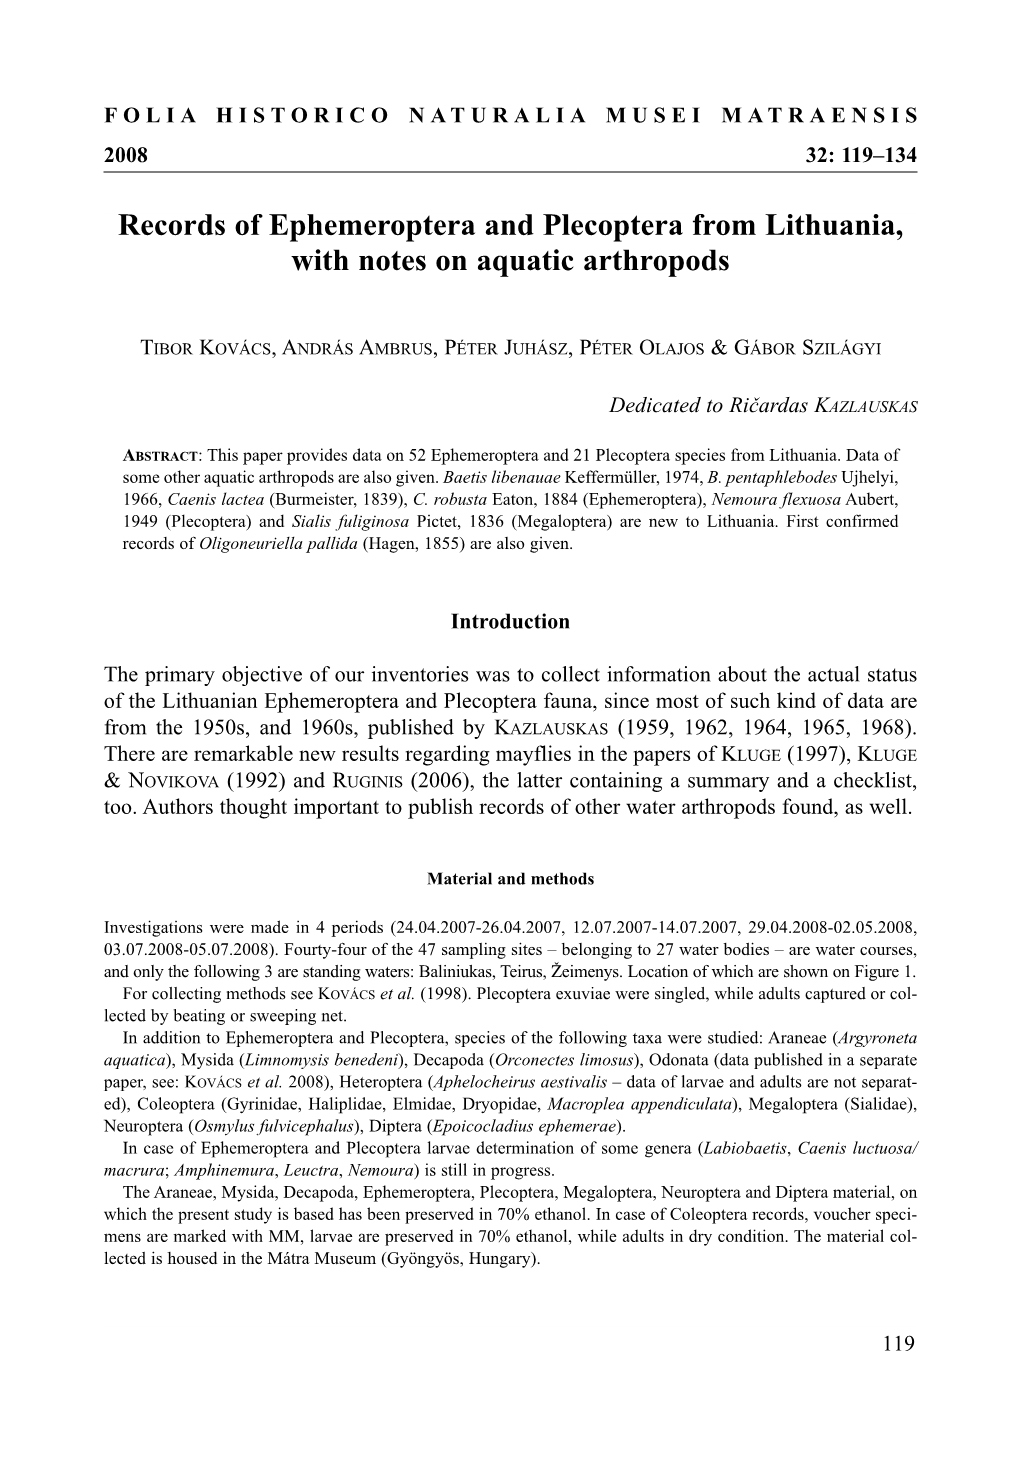 Records of Ephemeroptera and Plecoptera from Lithuania, with Notes on Aquatic Arthropods